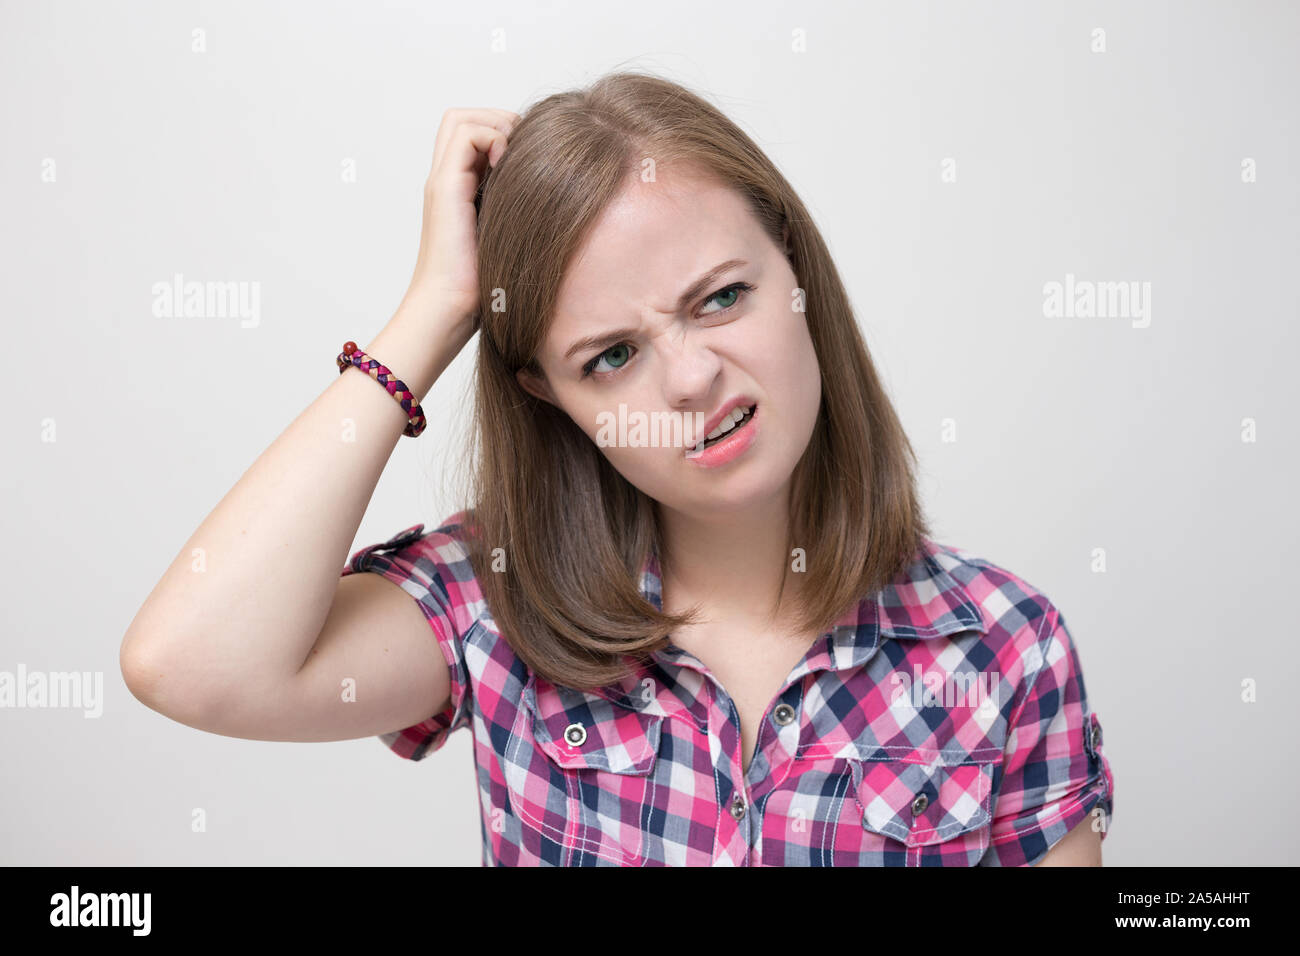 Young caucasian woman girl with questioning, puzzled, confused expression, thinking or remembering something Stock Photo